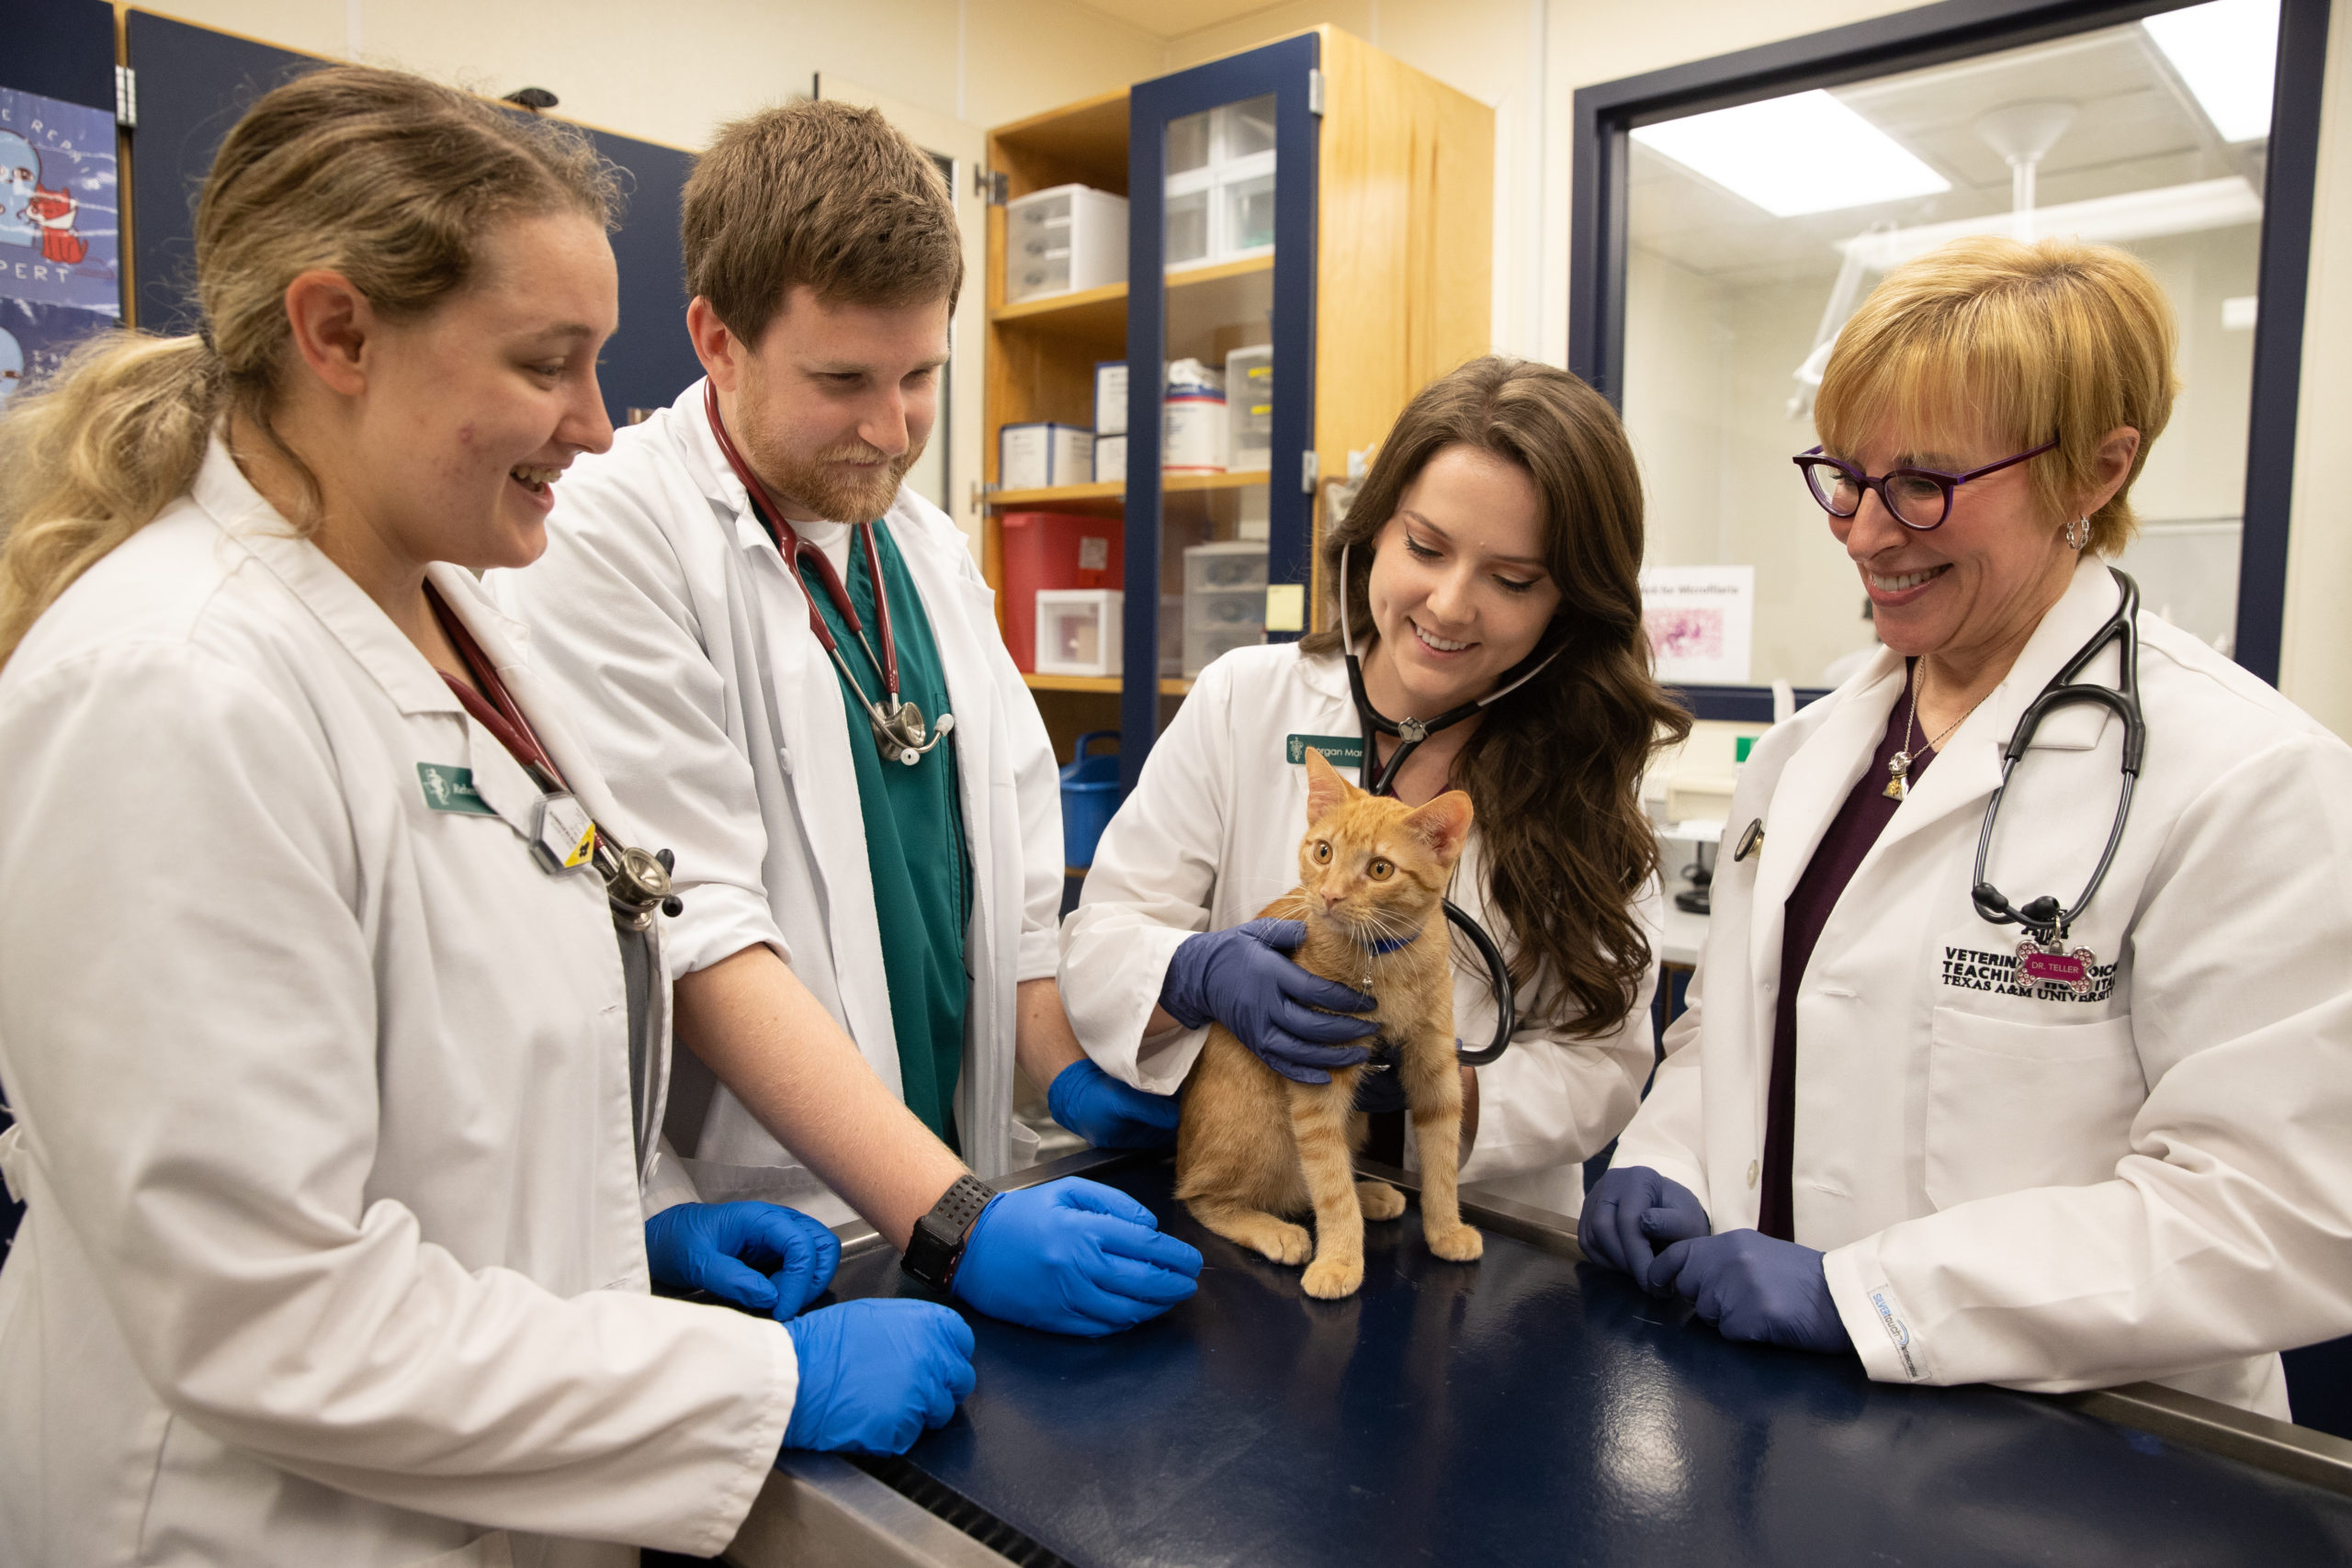 AVMA president and clinical associate professor of telehealth at the small animal teaching hospital, Dr. Lori Teller examines a cat with three dvm students in the primary care service.